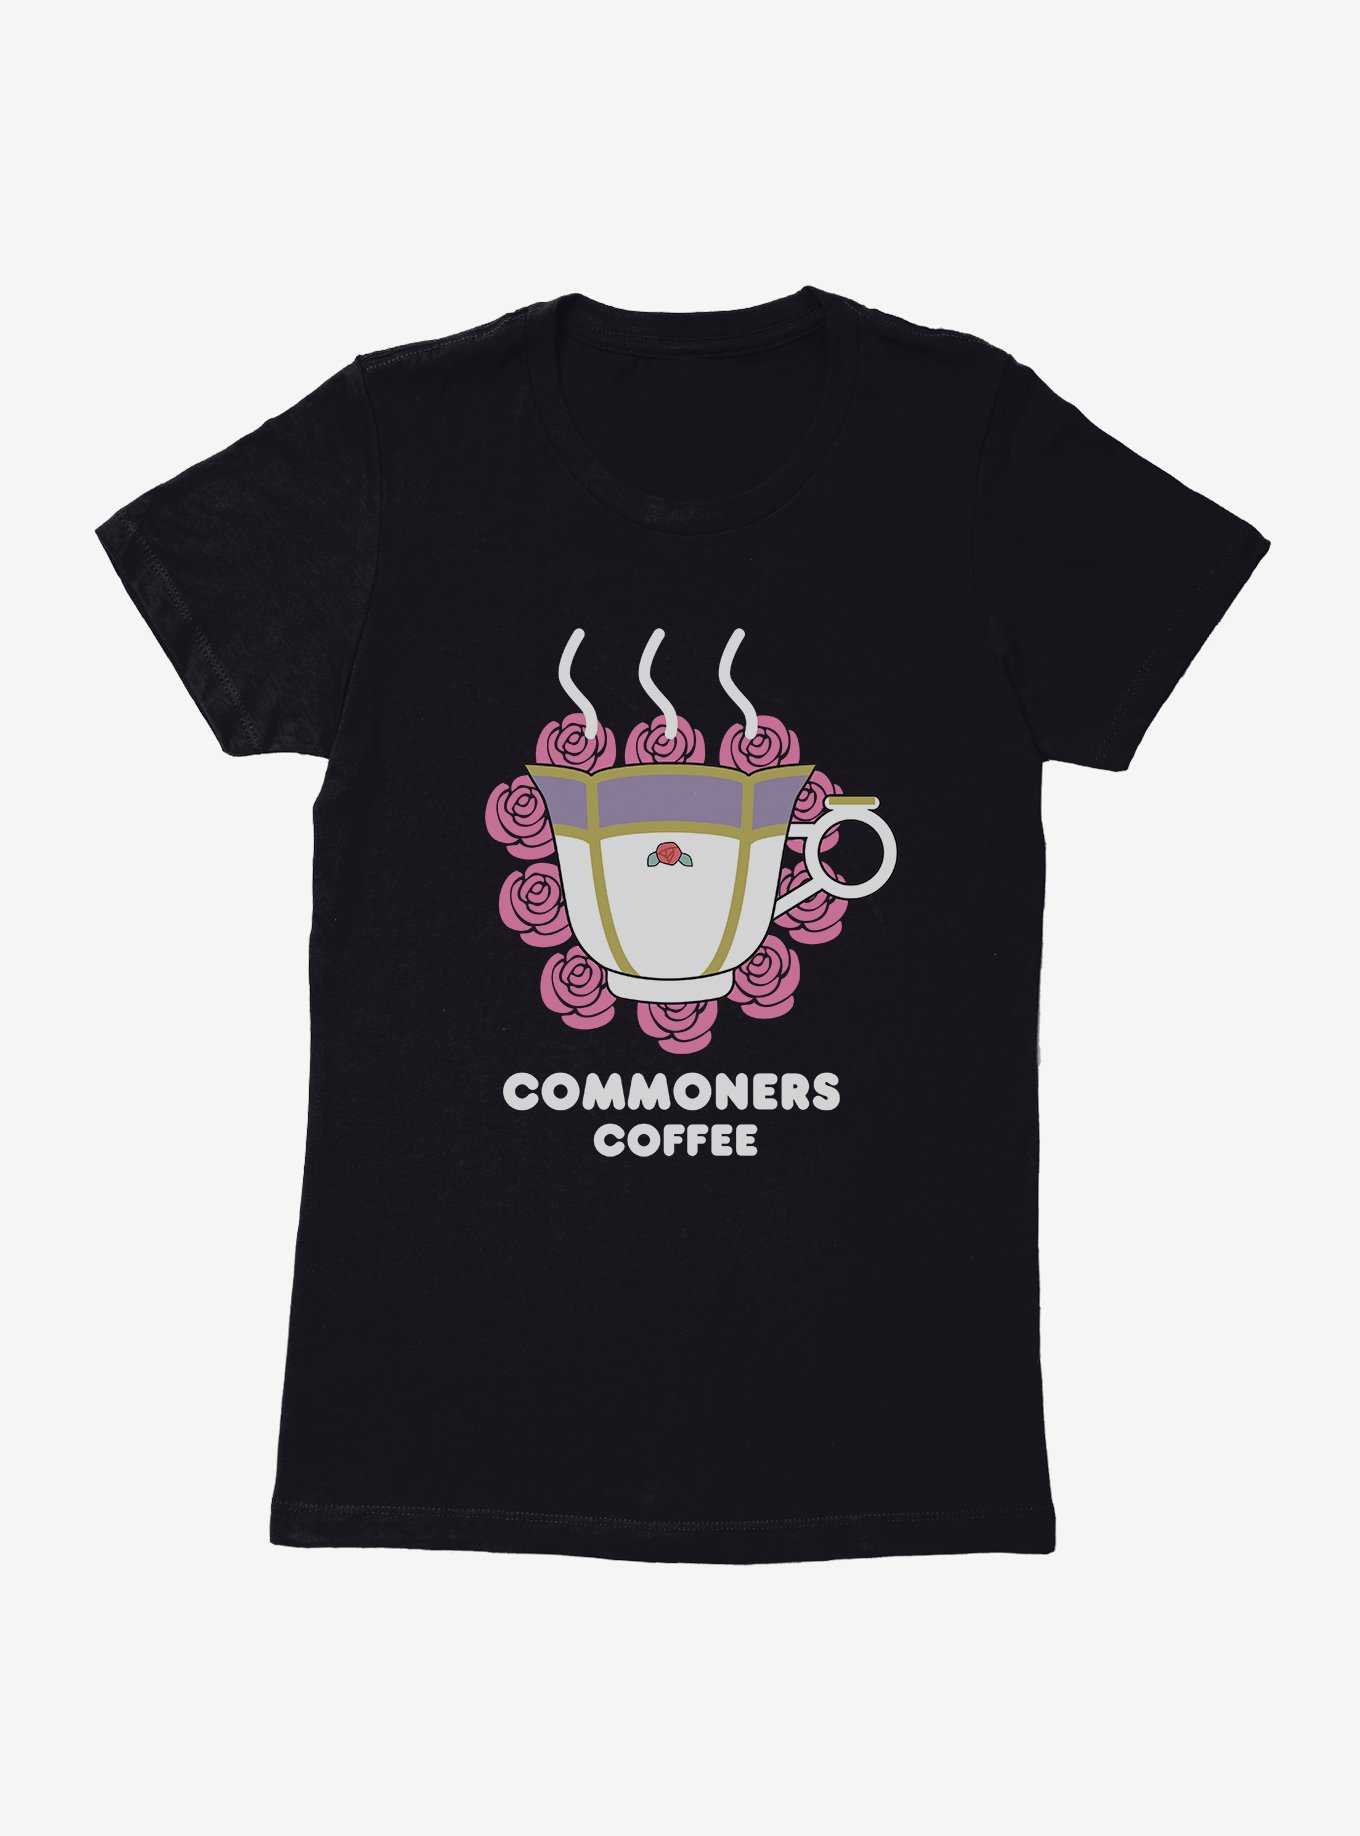 Ouran High School Host Club Commoners Coffee Womens T-Shirt, , hi-res